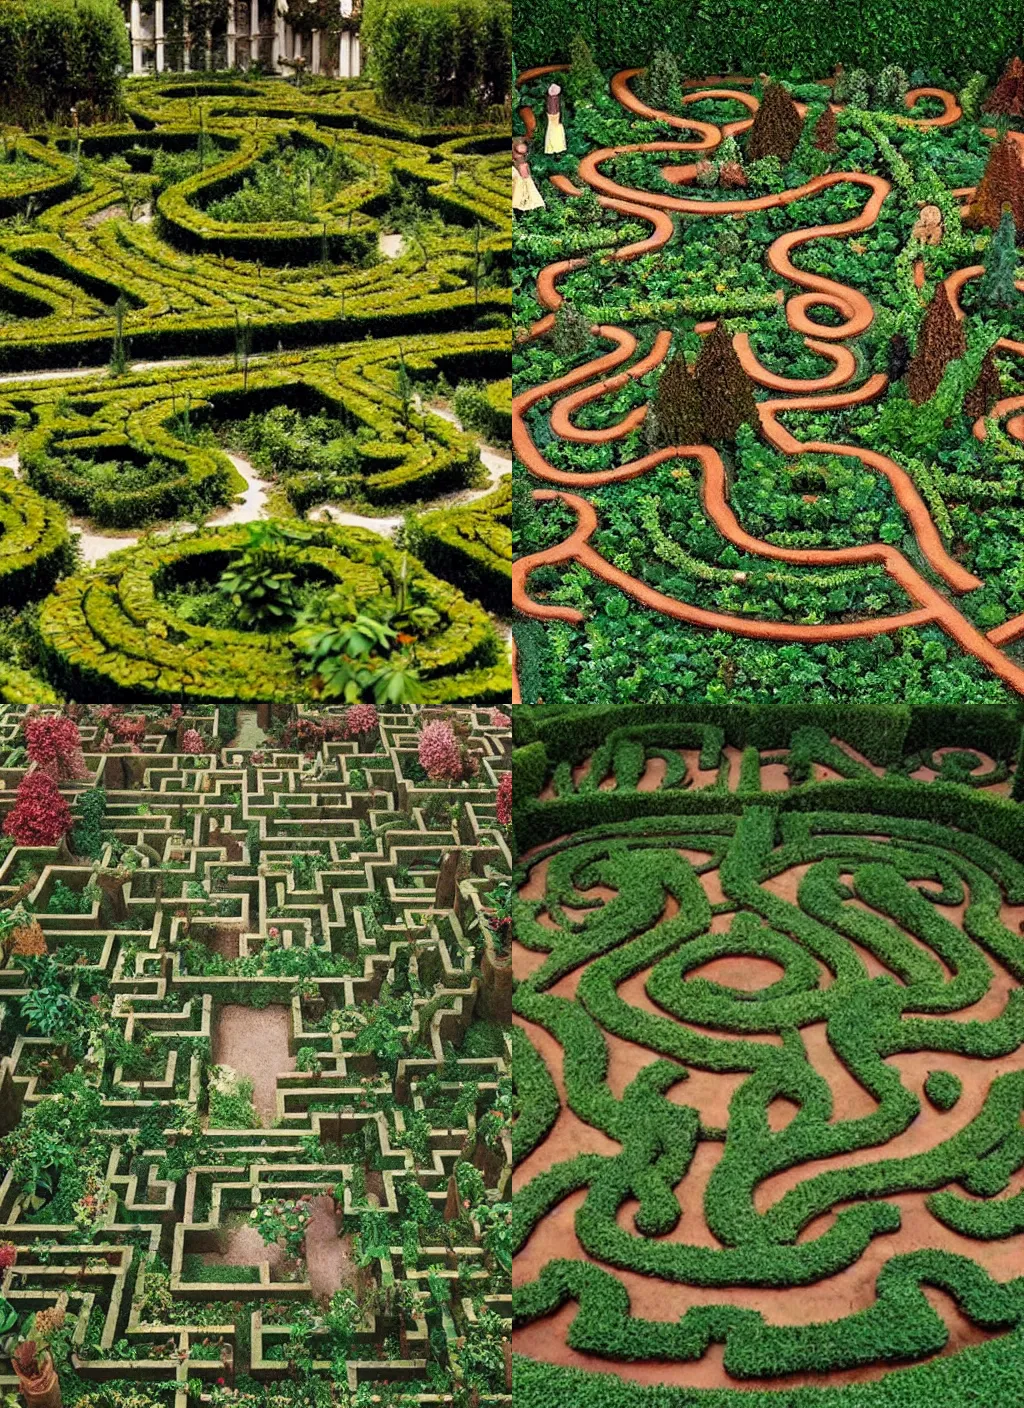 Prompt: An intricate labyrinth garden with plants and trees by Wes Anderson. Detailed. High quality. Symmetry.